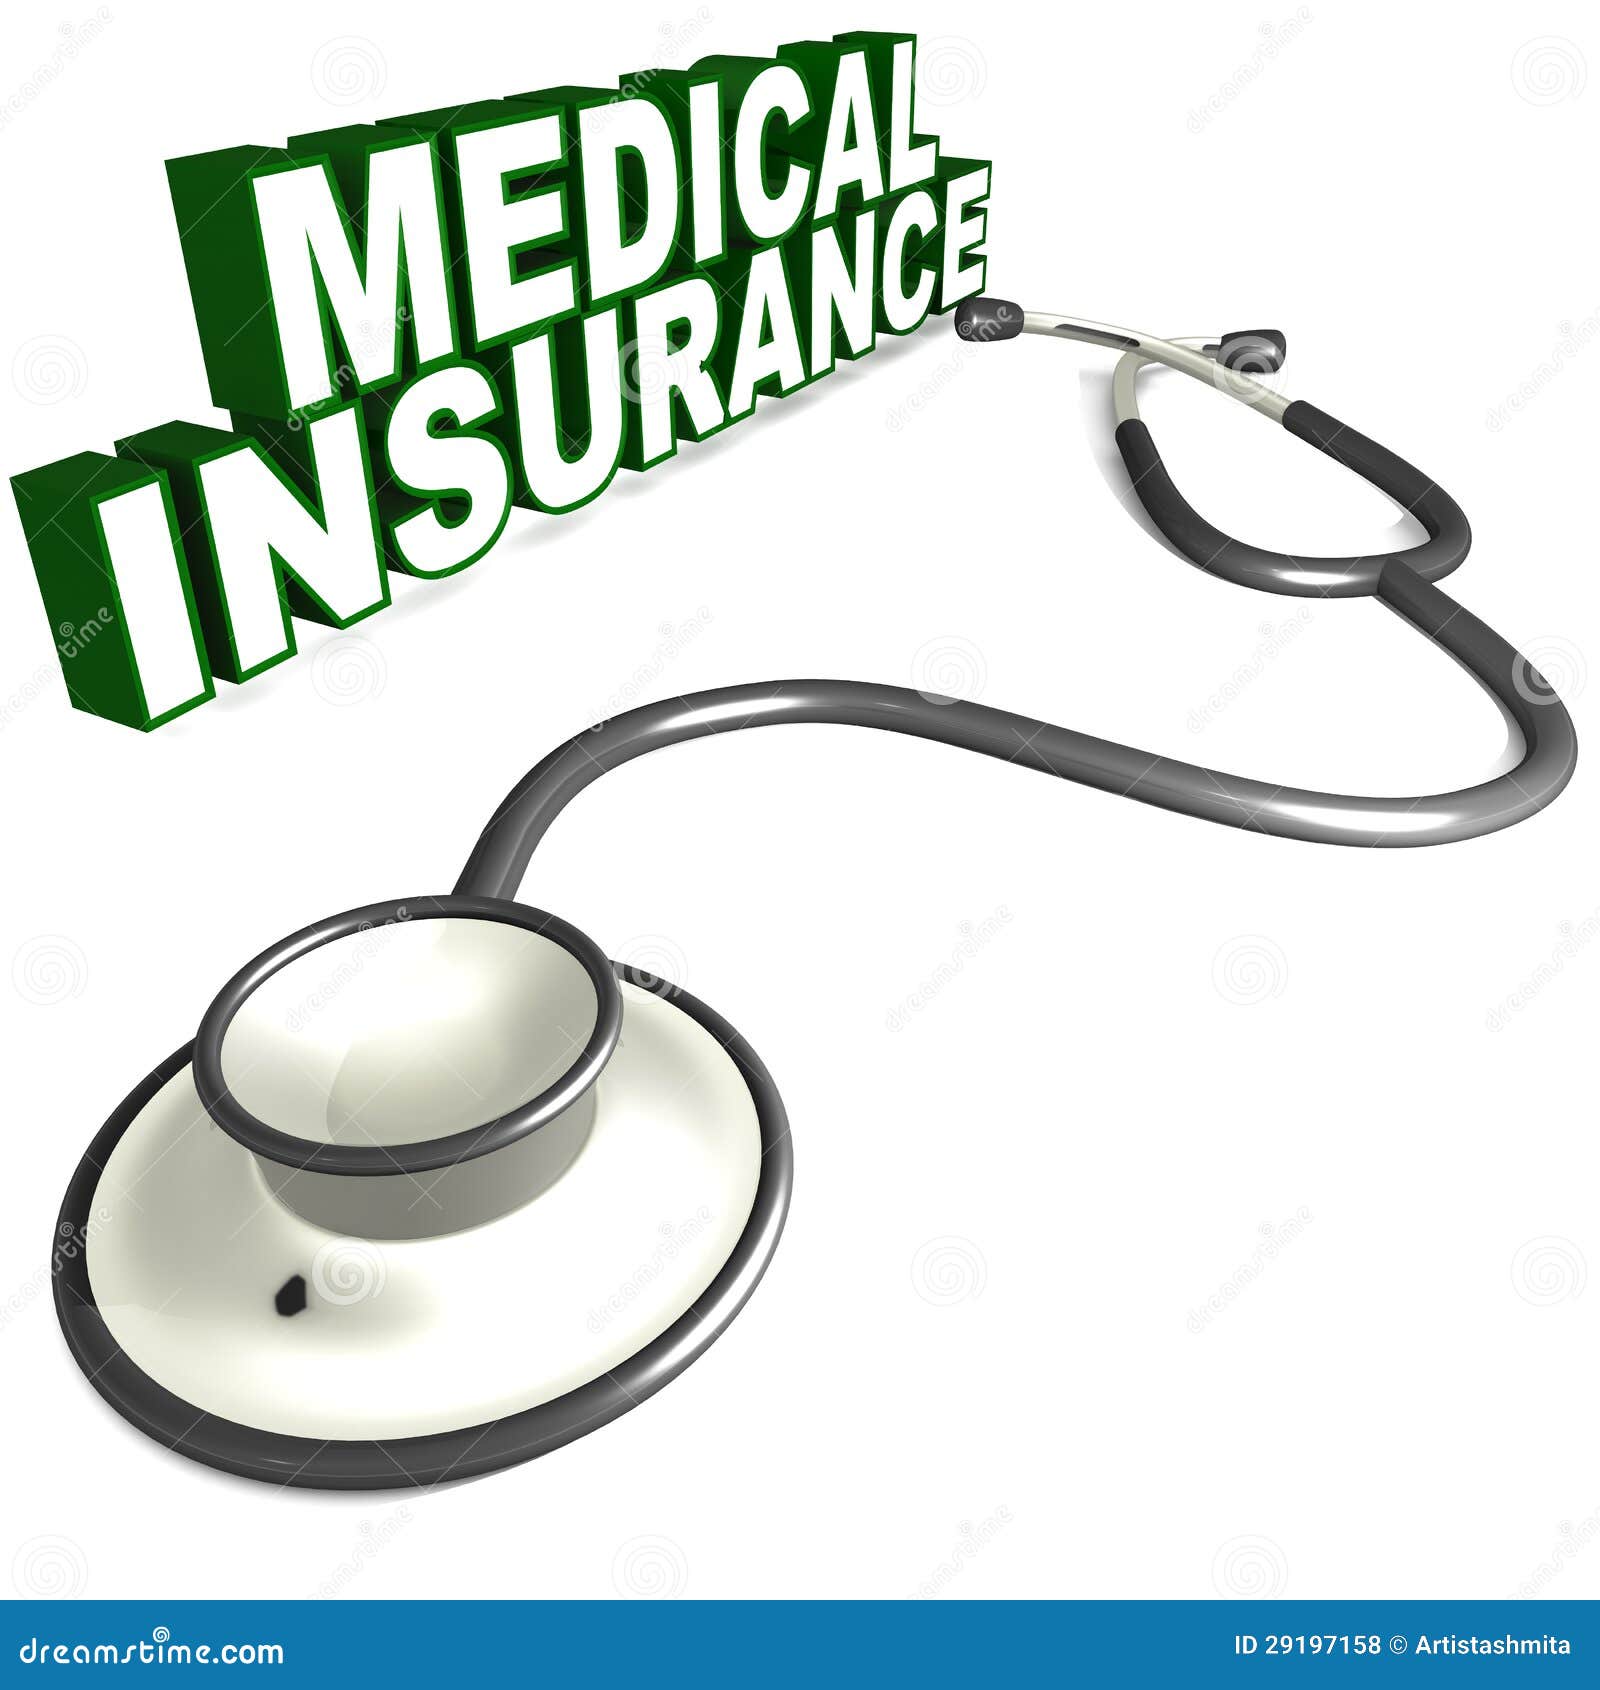 free clipart images healthcare - photo #44